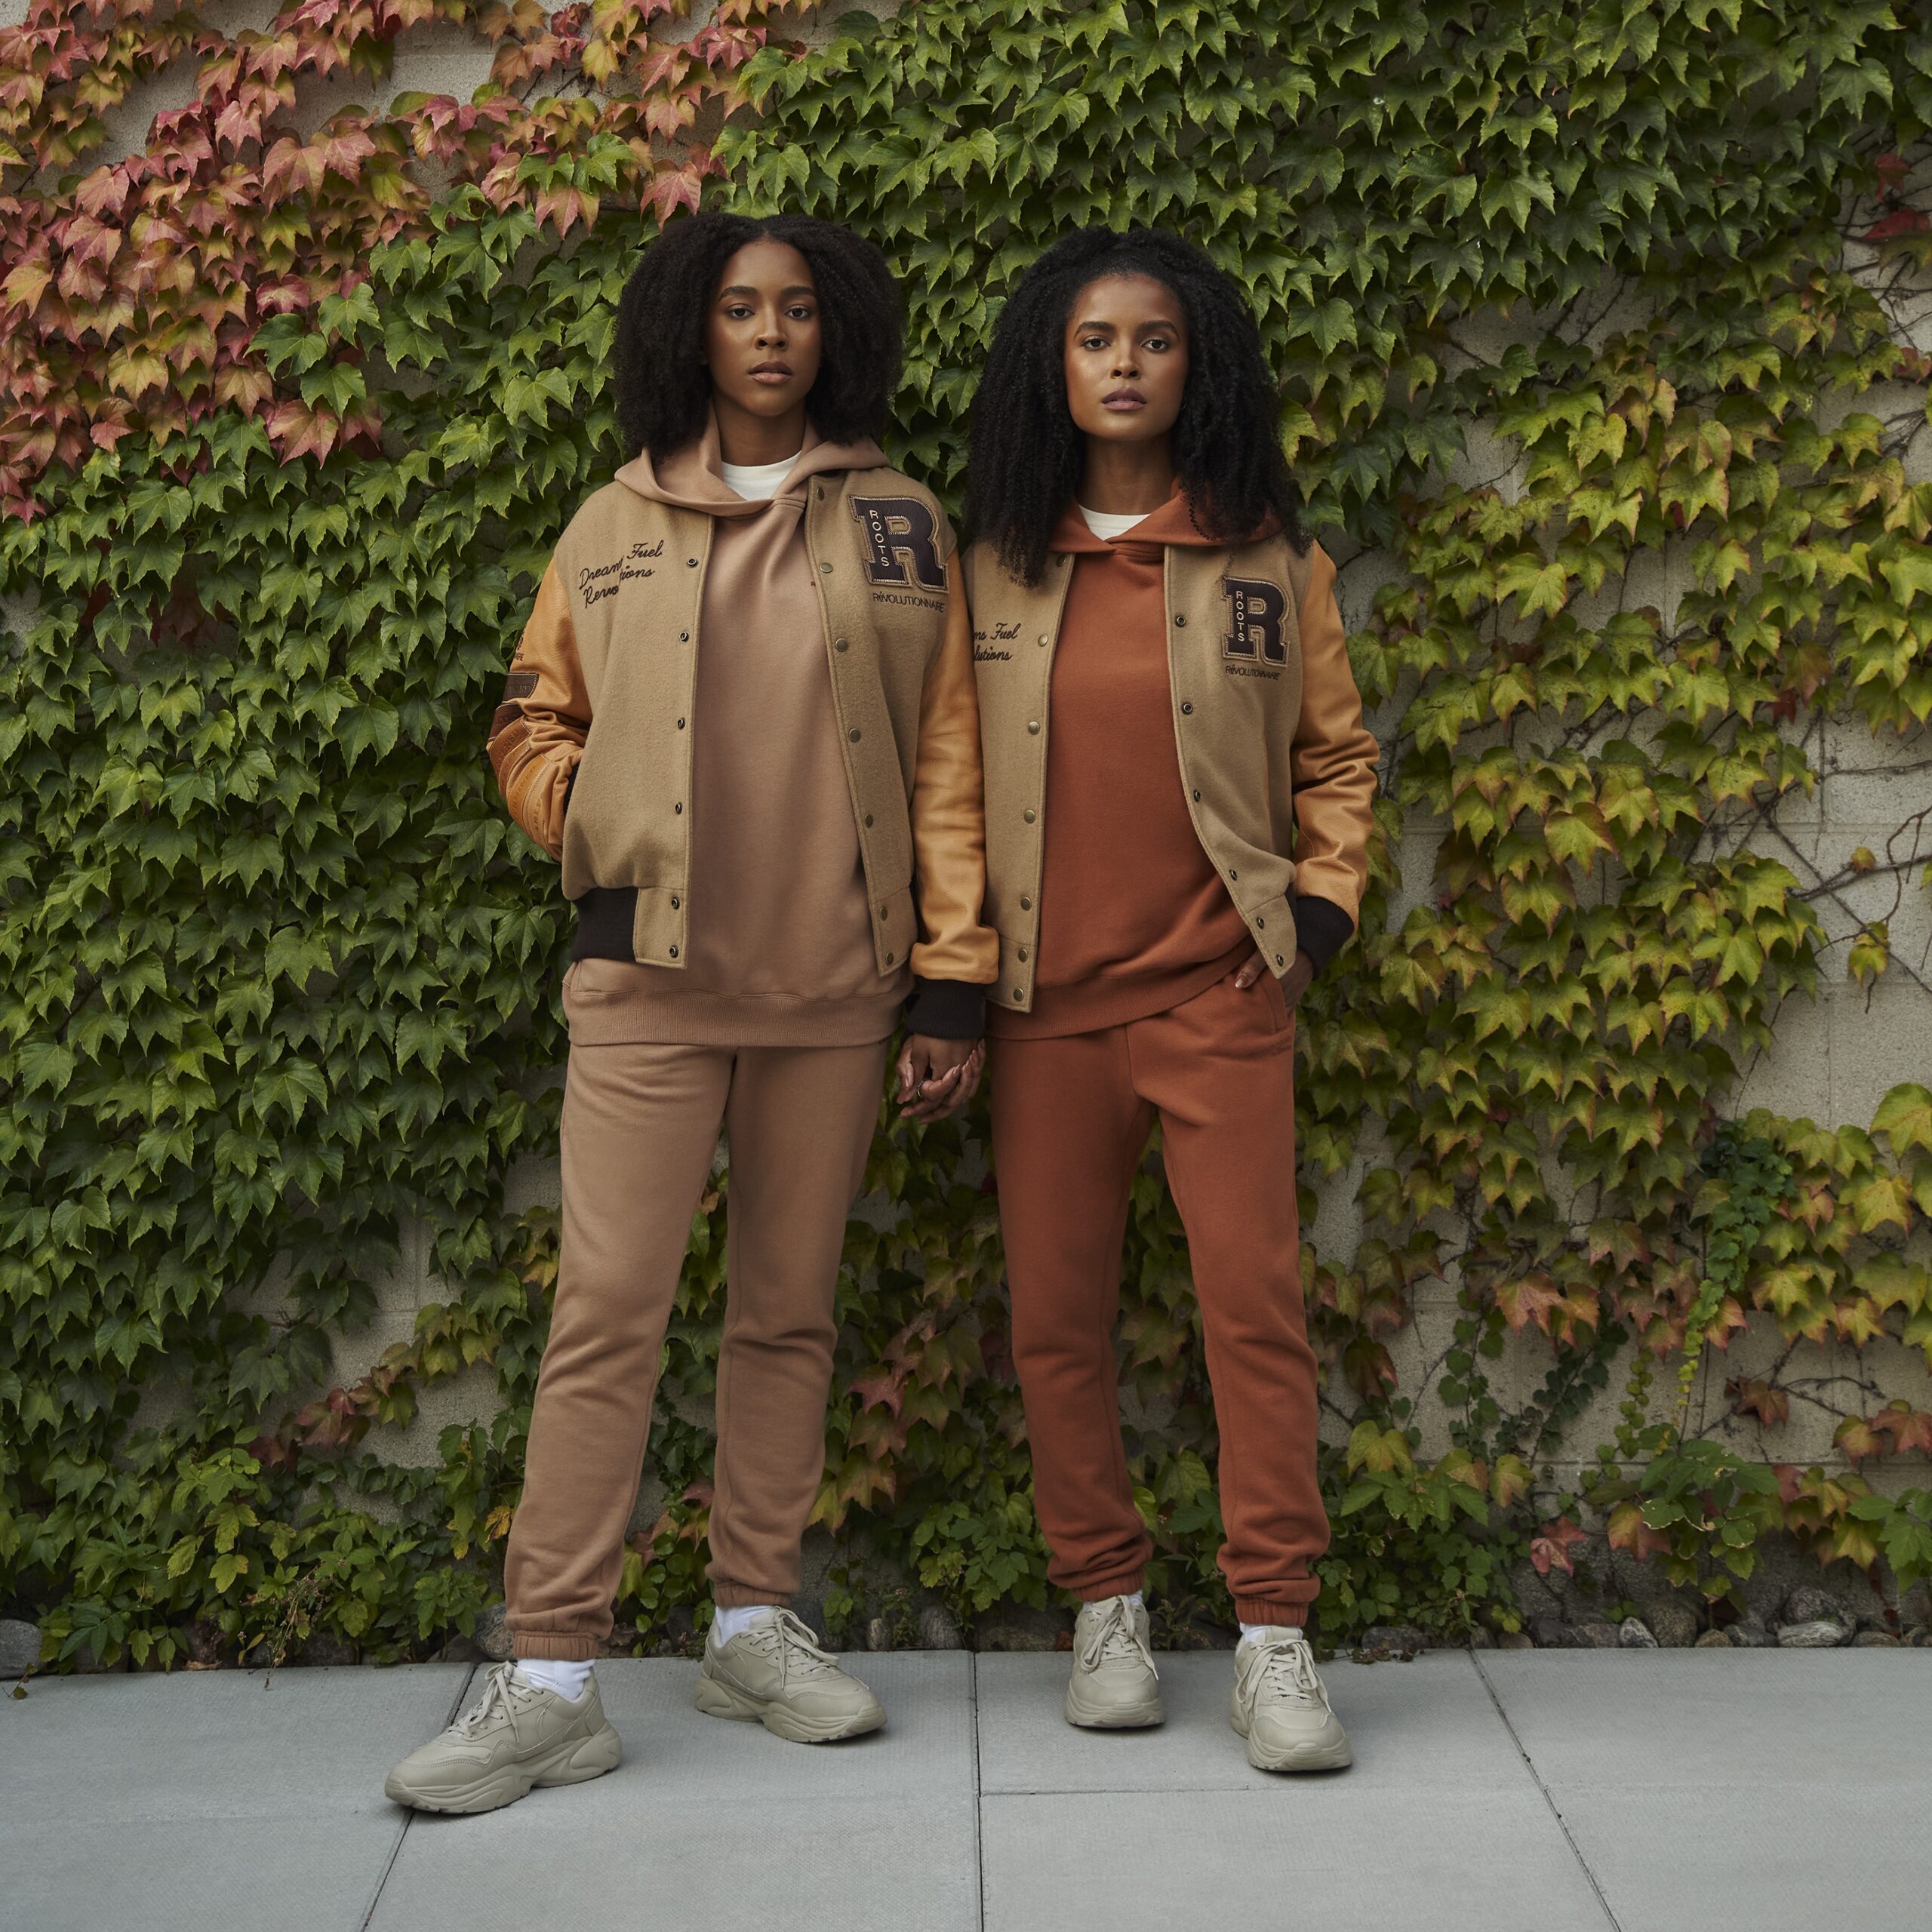 Meet The Revolutionary Sisters Behind This Fashionable Brand Collaboration